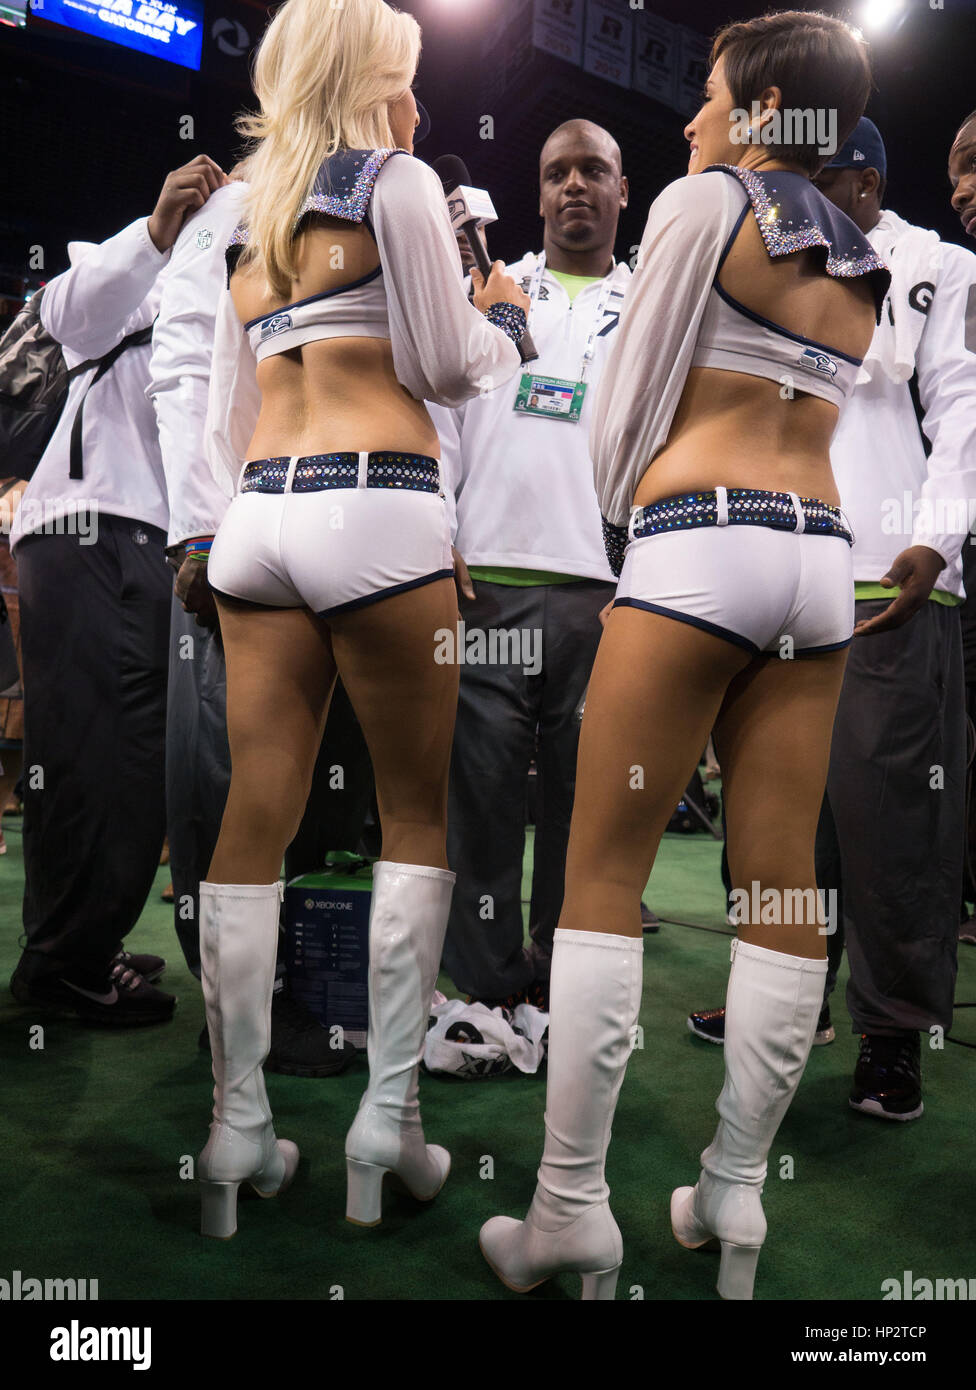 Seattle Seahawks cheerleaders interview the Seahawks players on